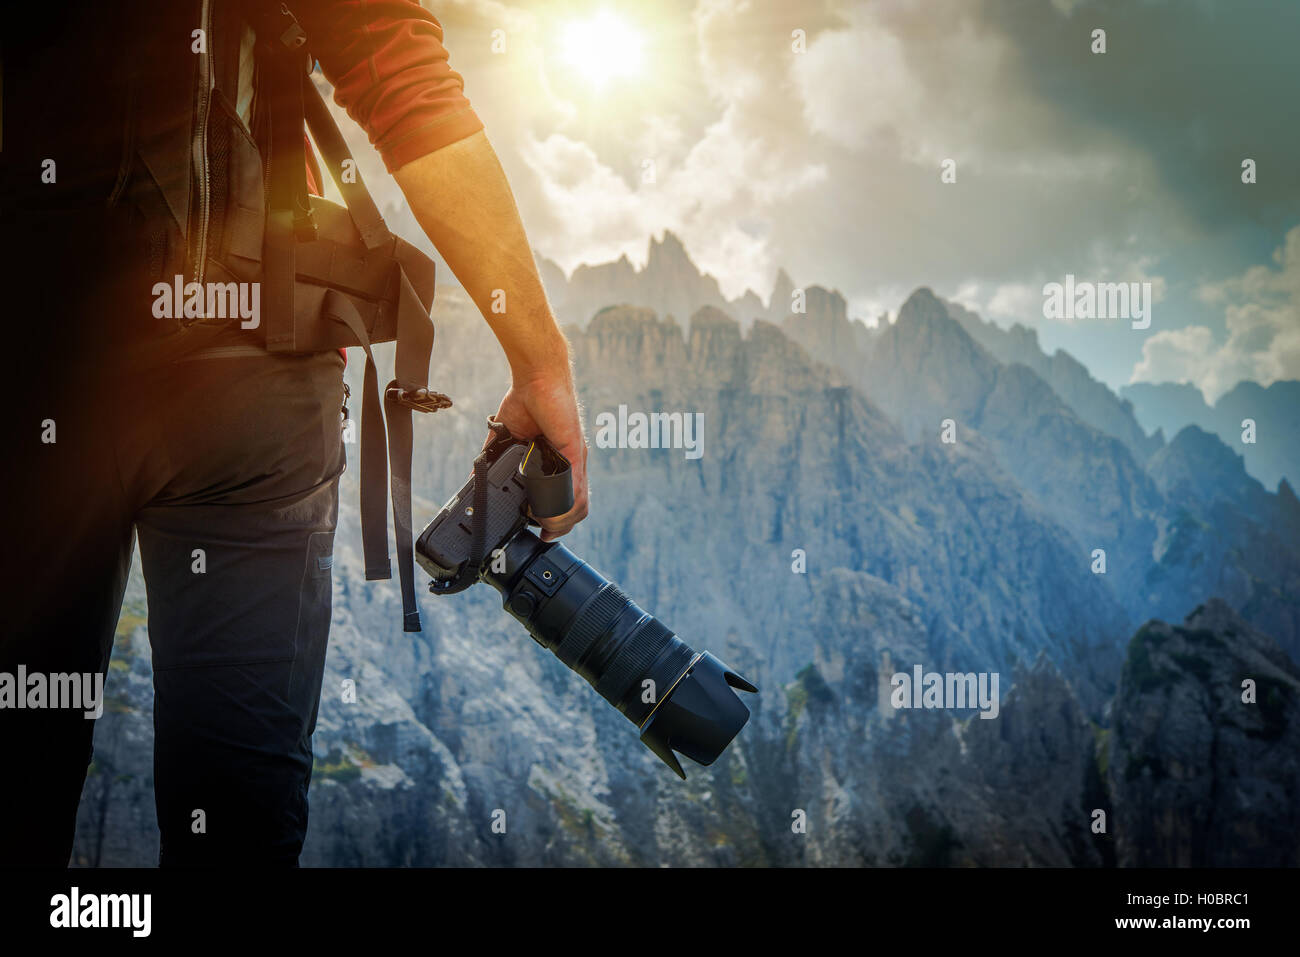 Nature Photography Concept. Professional Nature Photographer and the Mountain Vista. Stock Photo